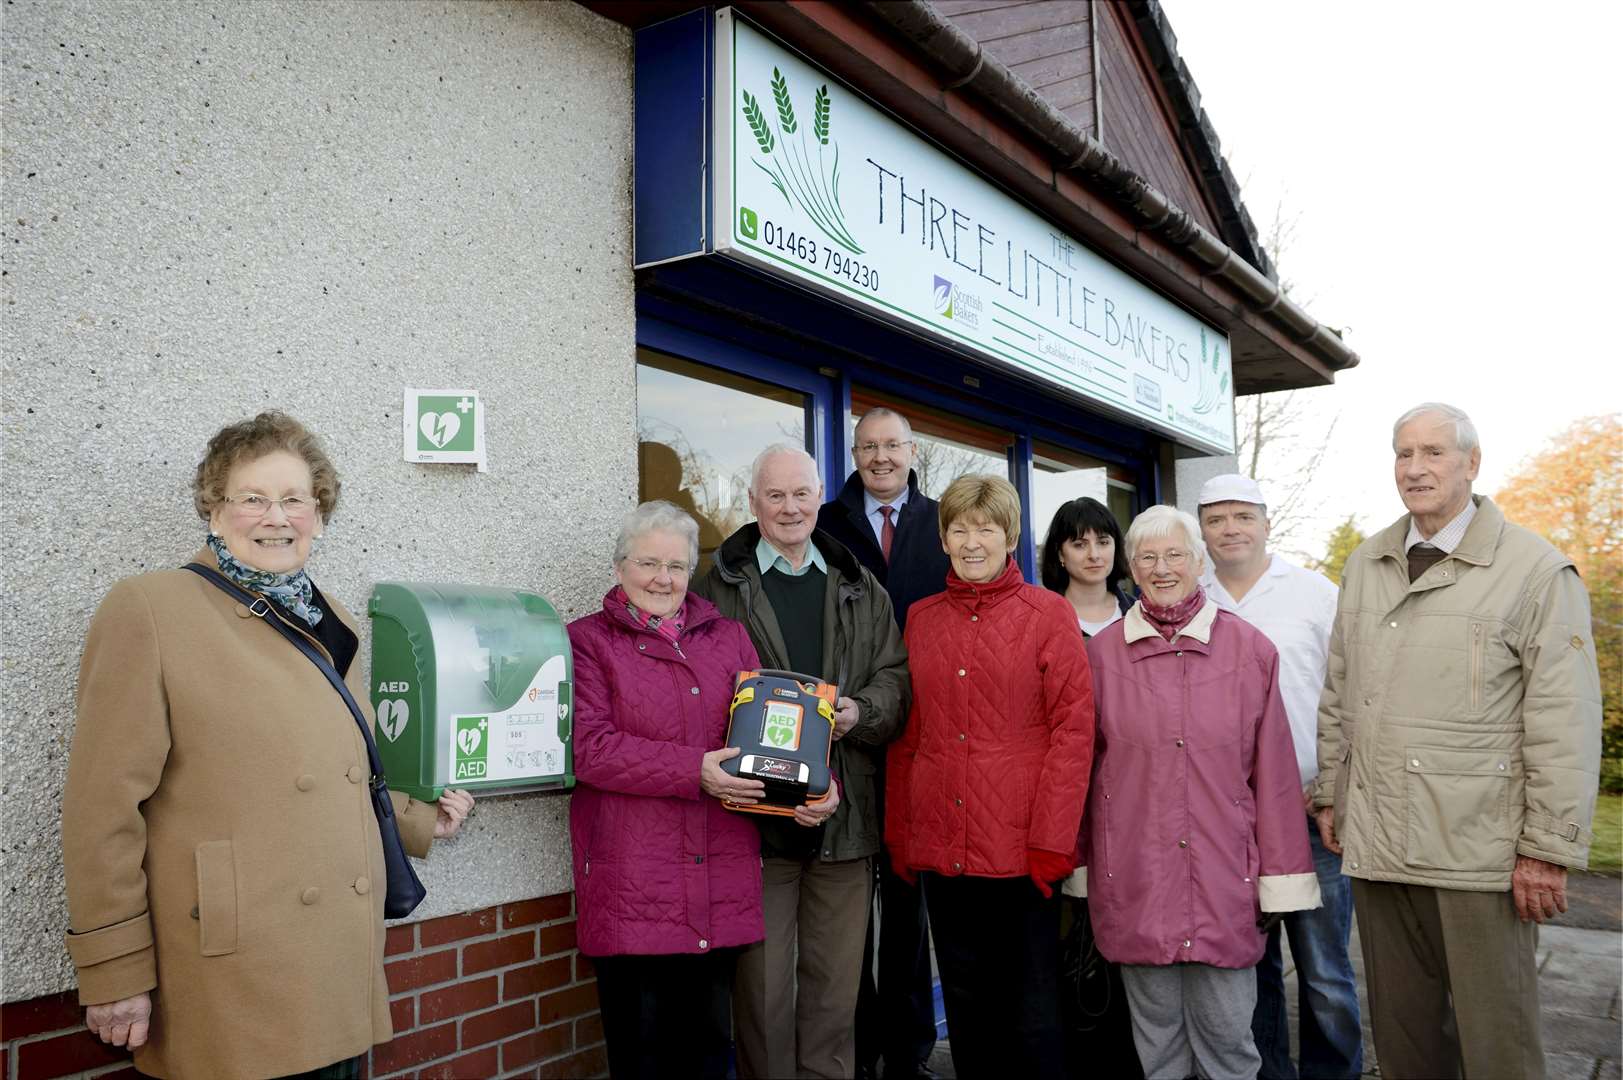 Marlene and Hugh Munro with one of the defibrillators bought using donations, surrounded by people from the community.